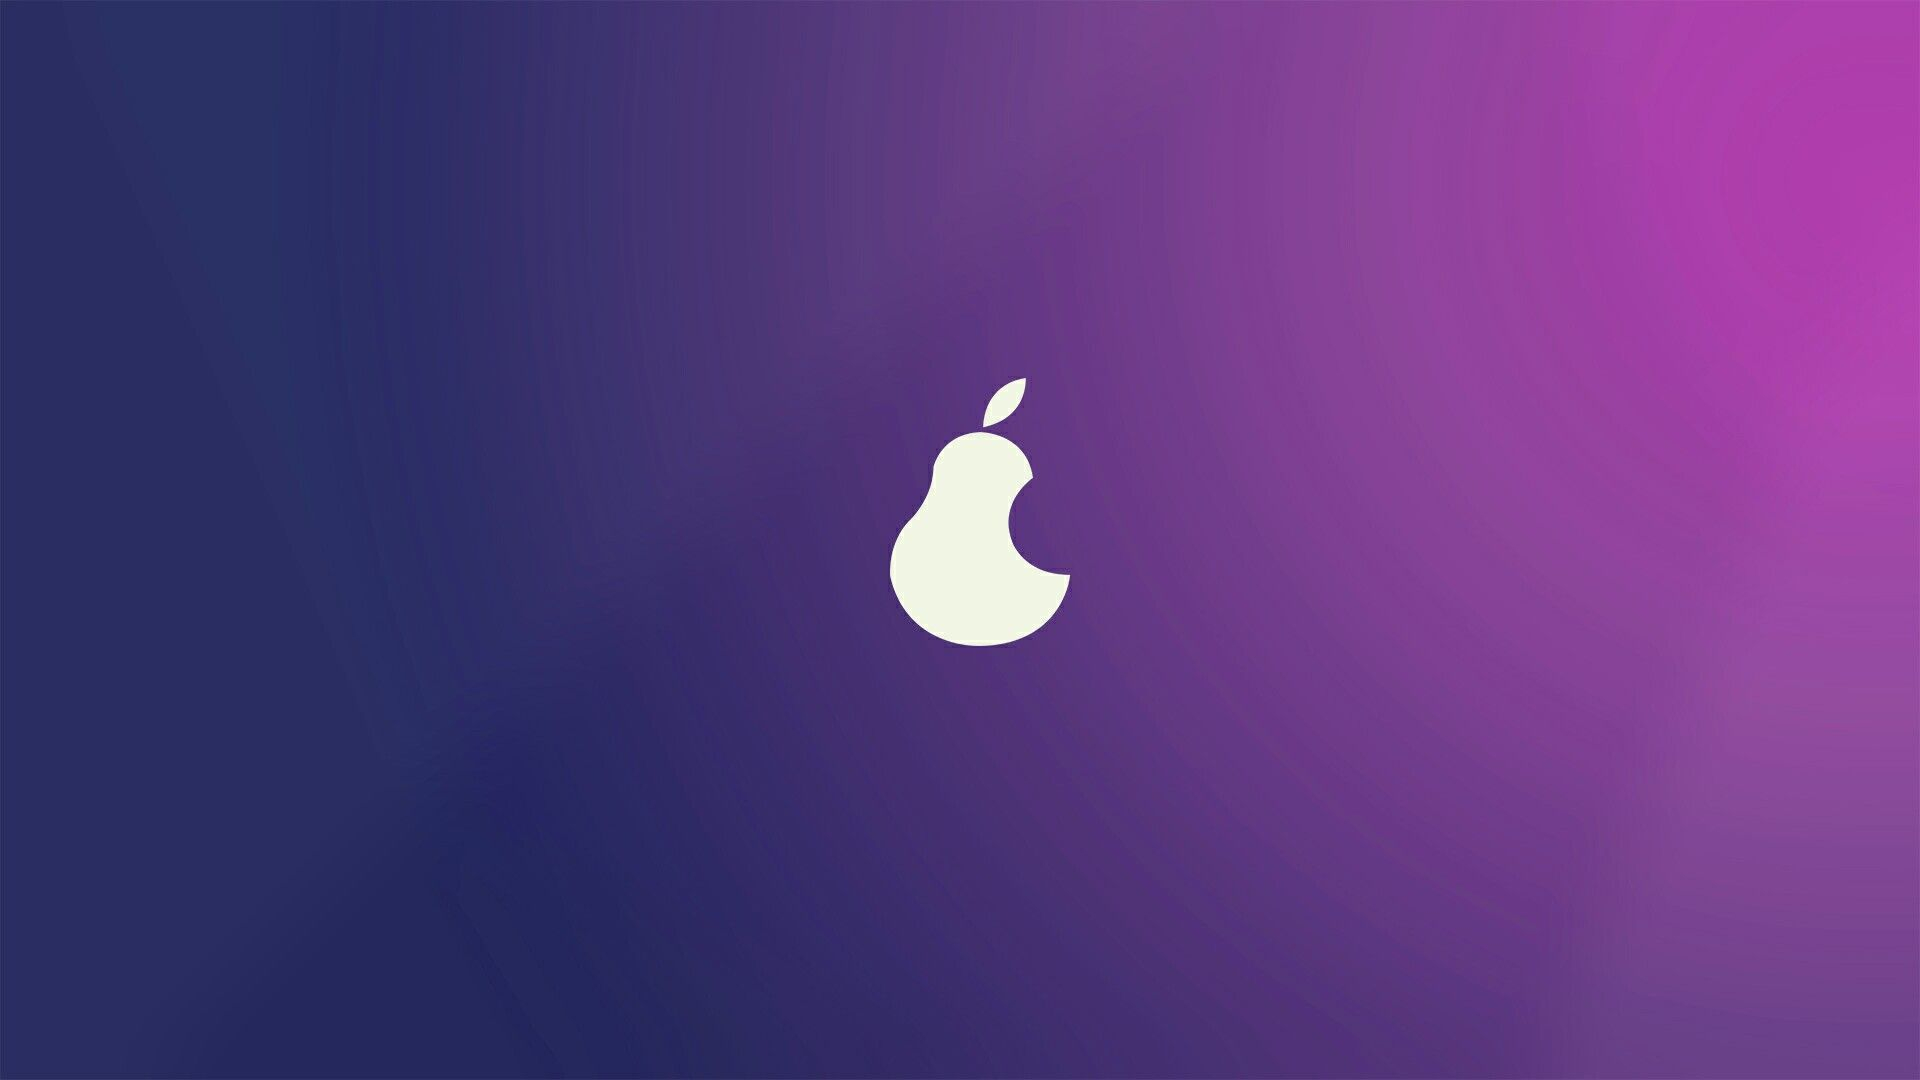 1920x1080 This is my own wallpaper creation of (Pear OS